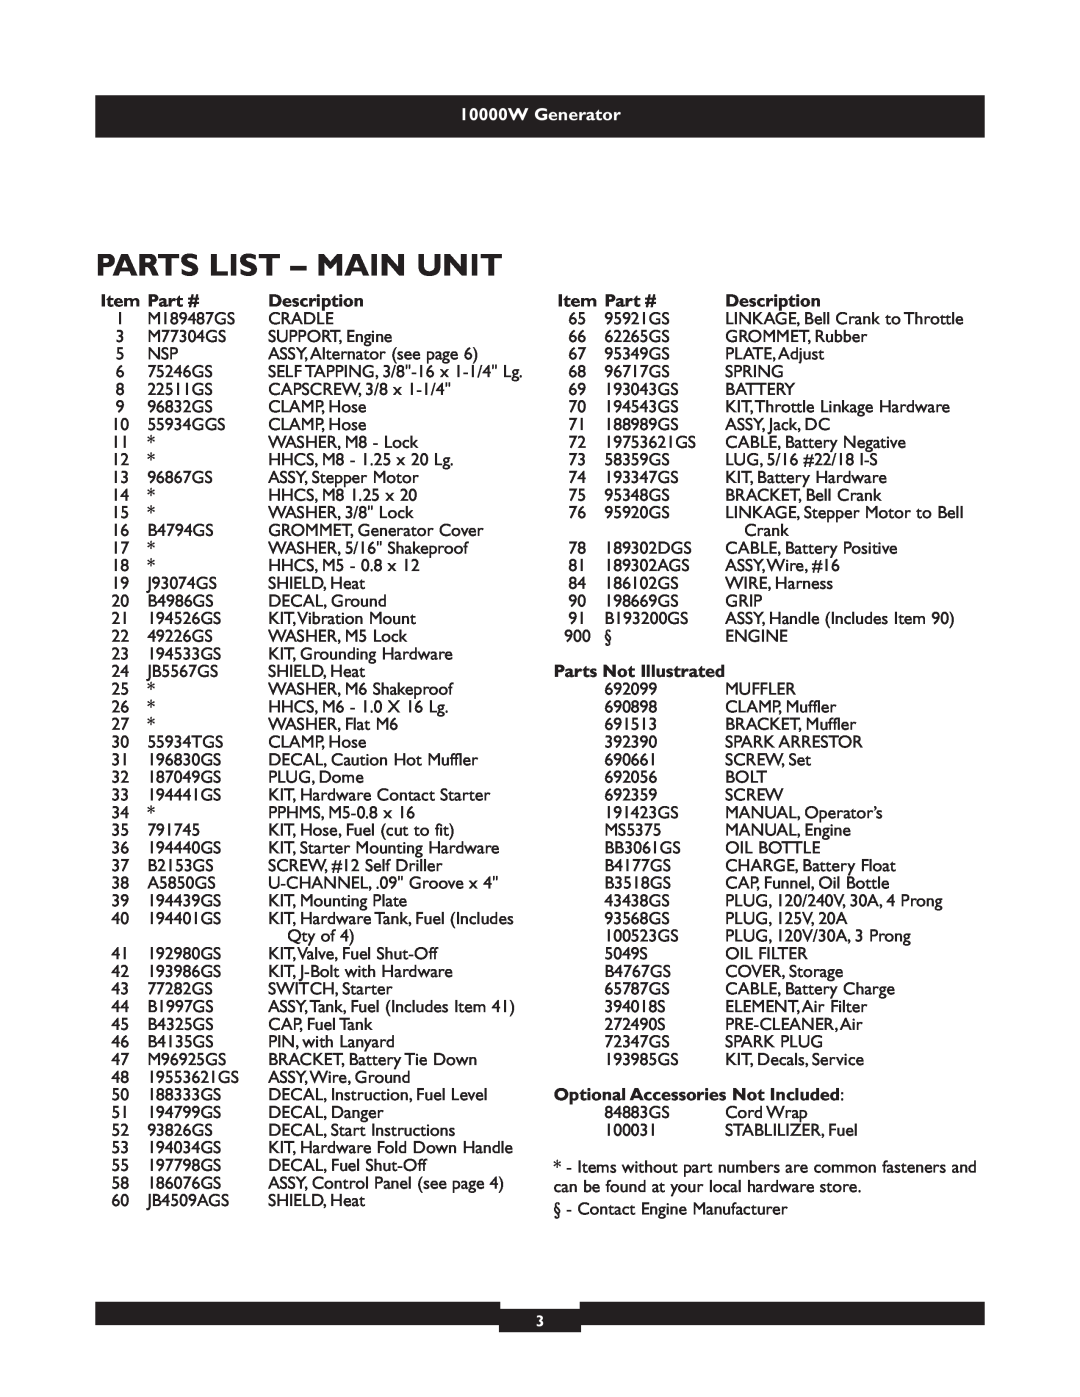 Briggs & Stratton 9801 manual Parts List - Main Unit, Description, Parts Not Illustrated, Optional Accessories Not Included 